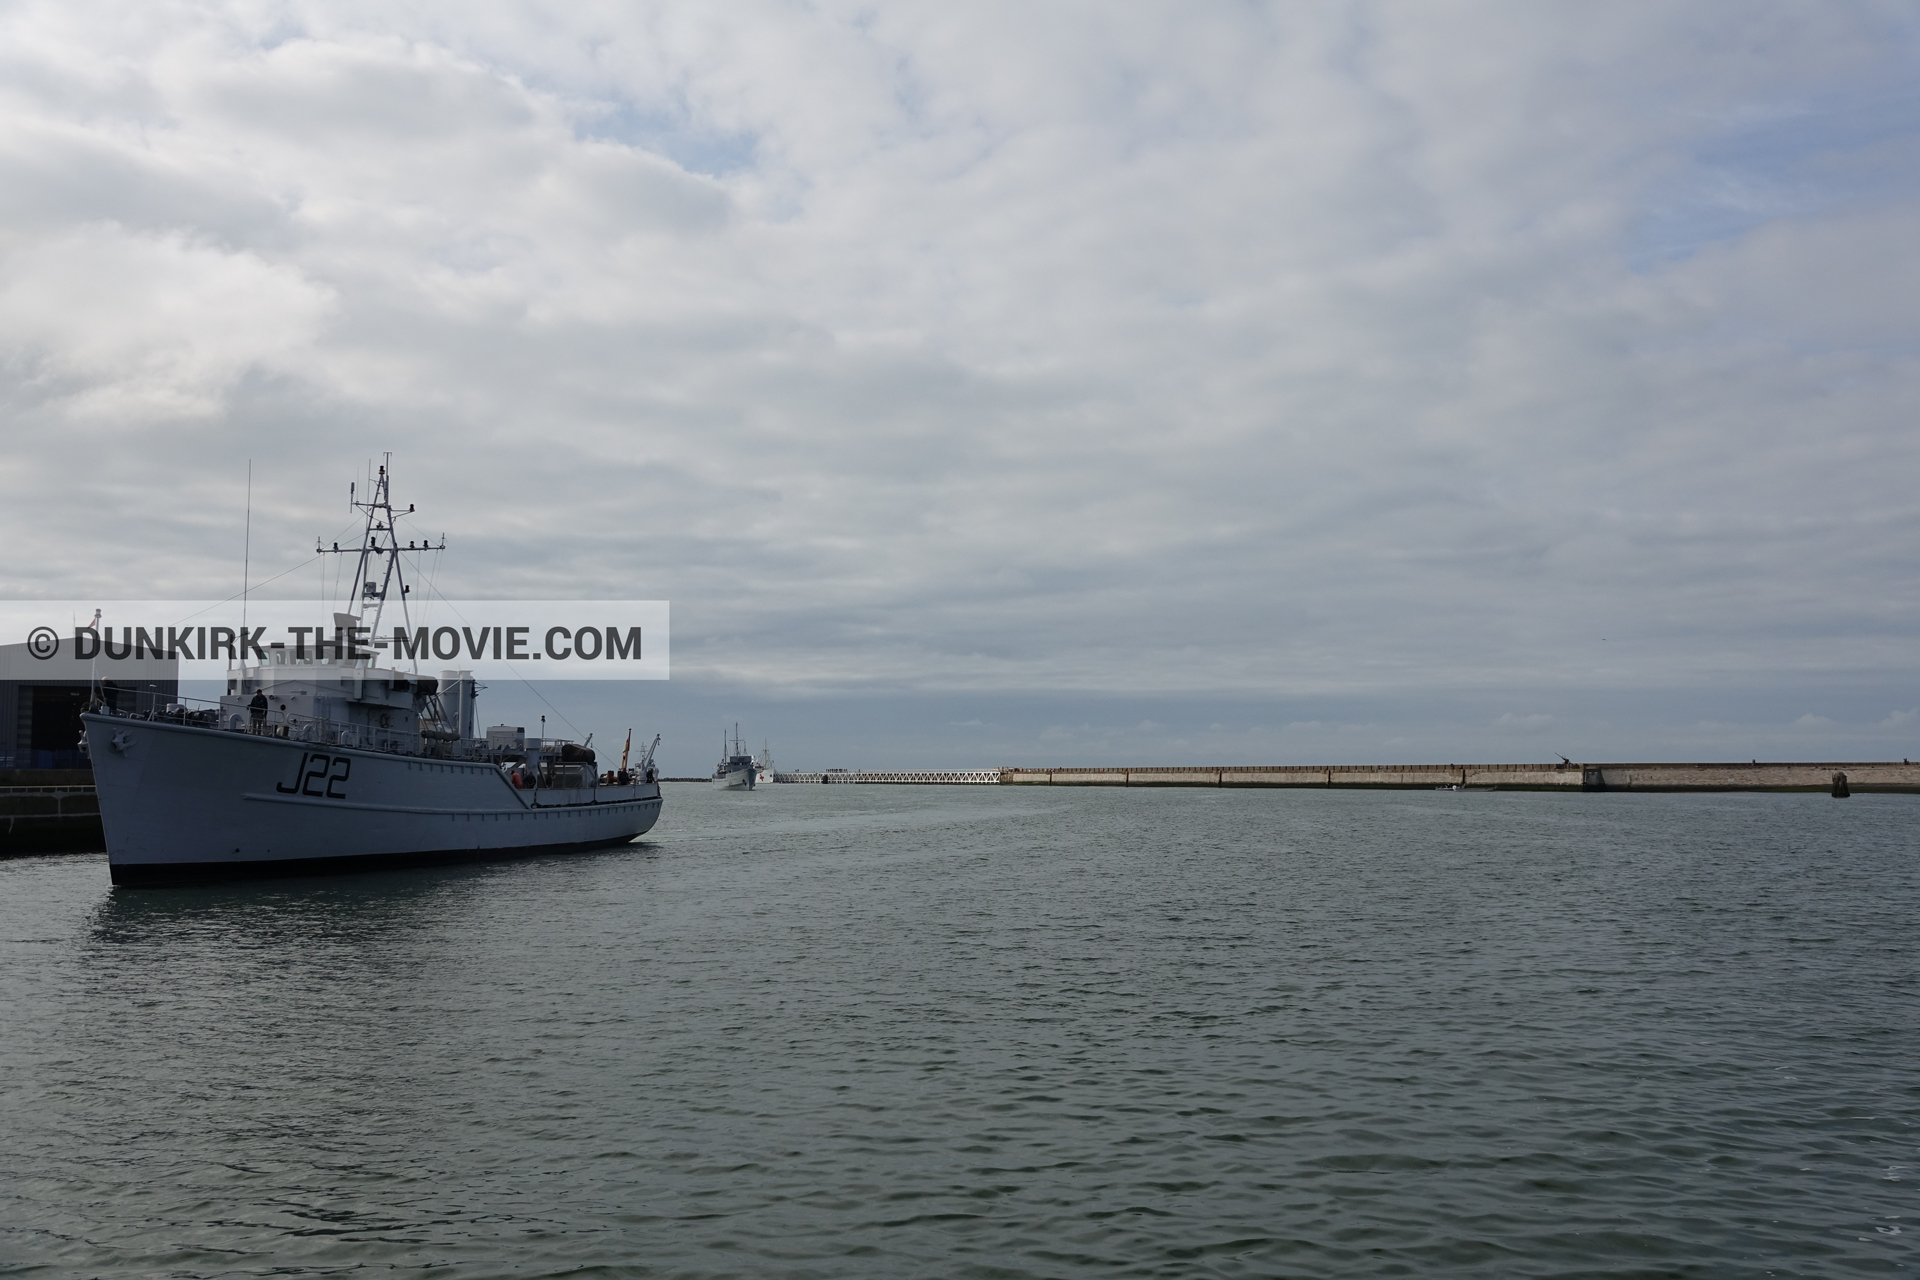 Picture with cloudy sky, J22 -Hr.Ms. Naaldwijk, EST pier, calm sea,  from behind the scene of the Dunkirk movie by Nolan